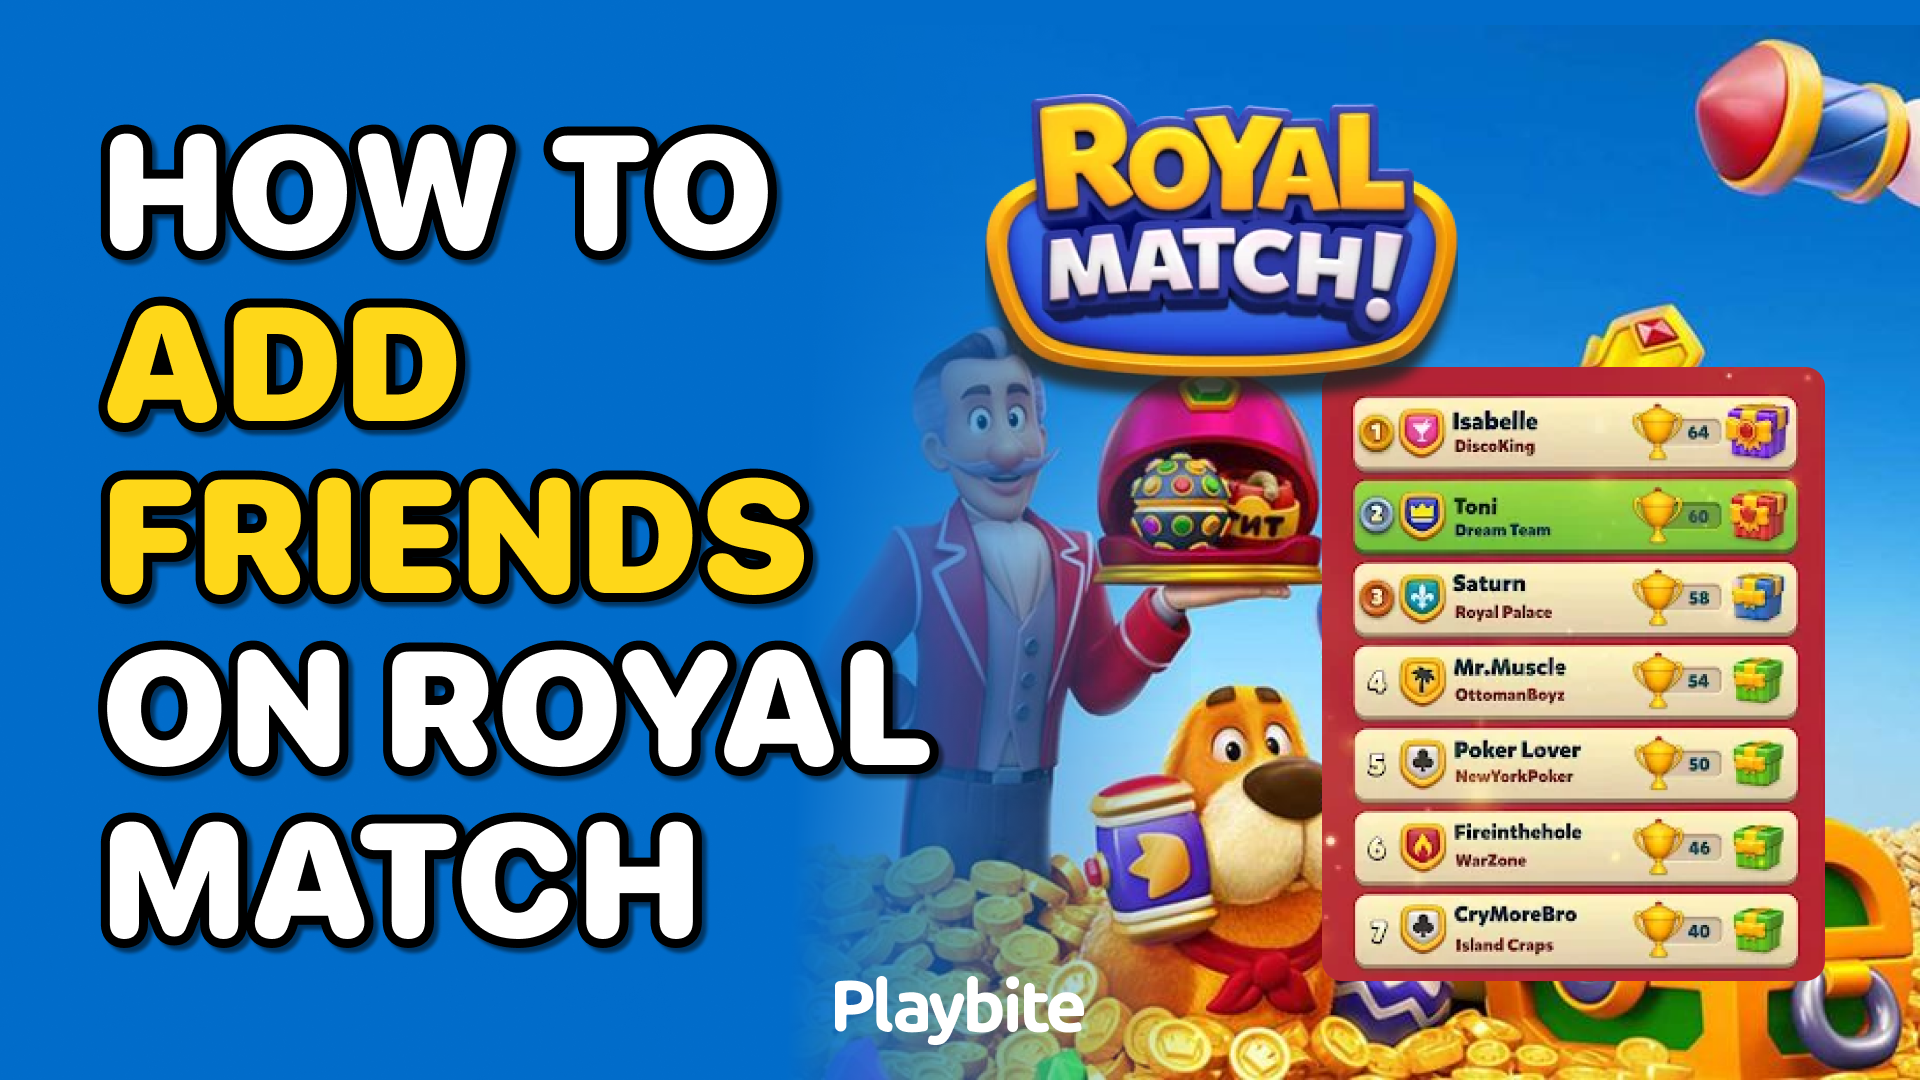 How To Add Friends On Royal Match